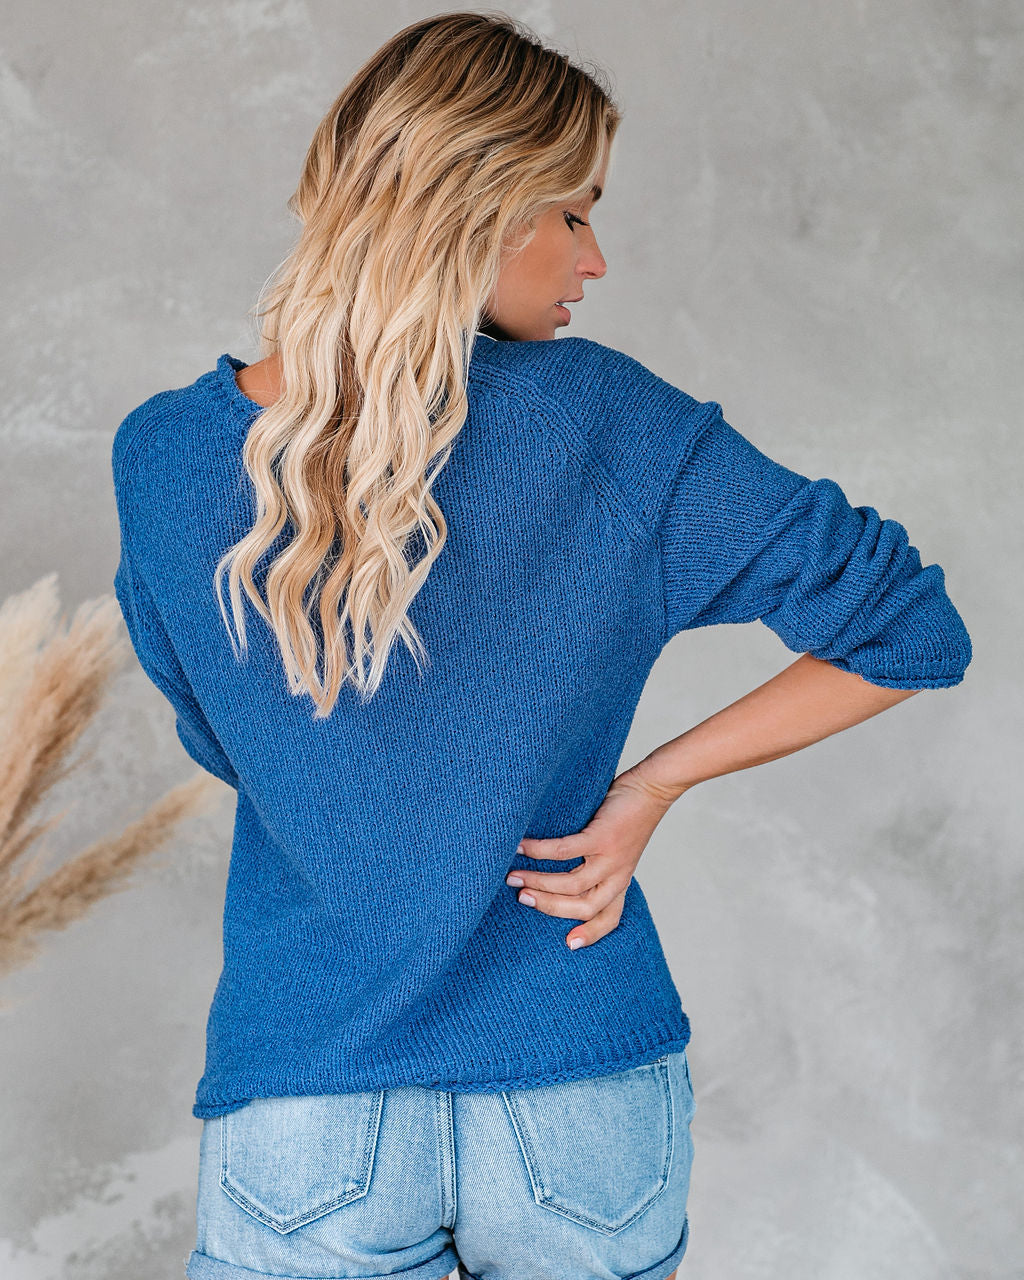 Catch The Ferry Knit Sweater